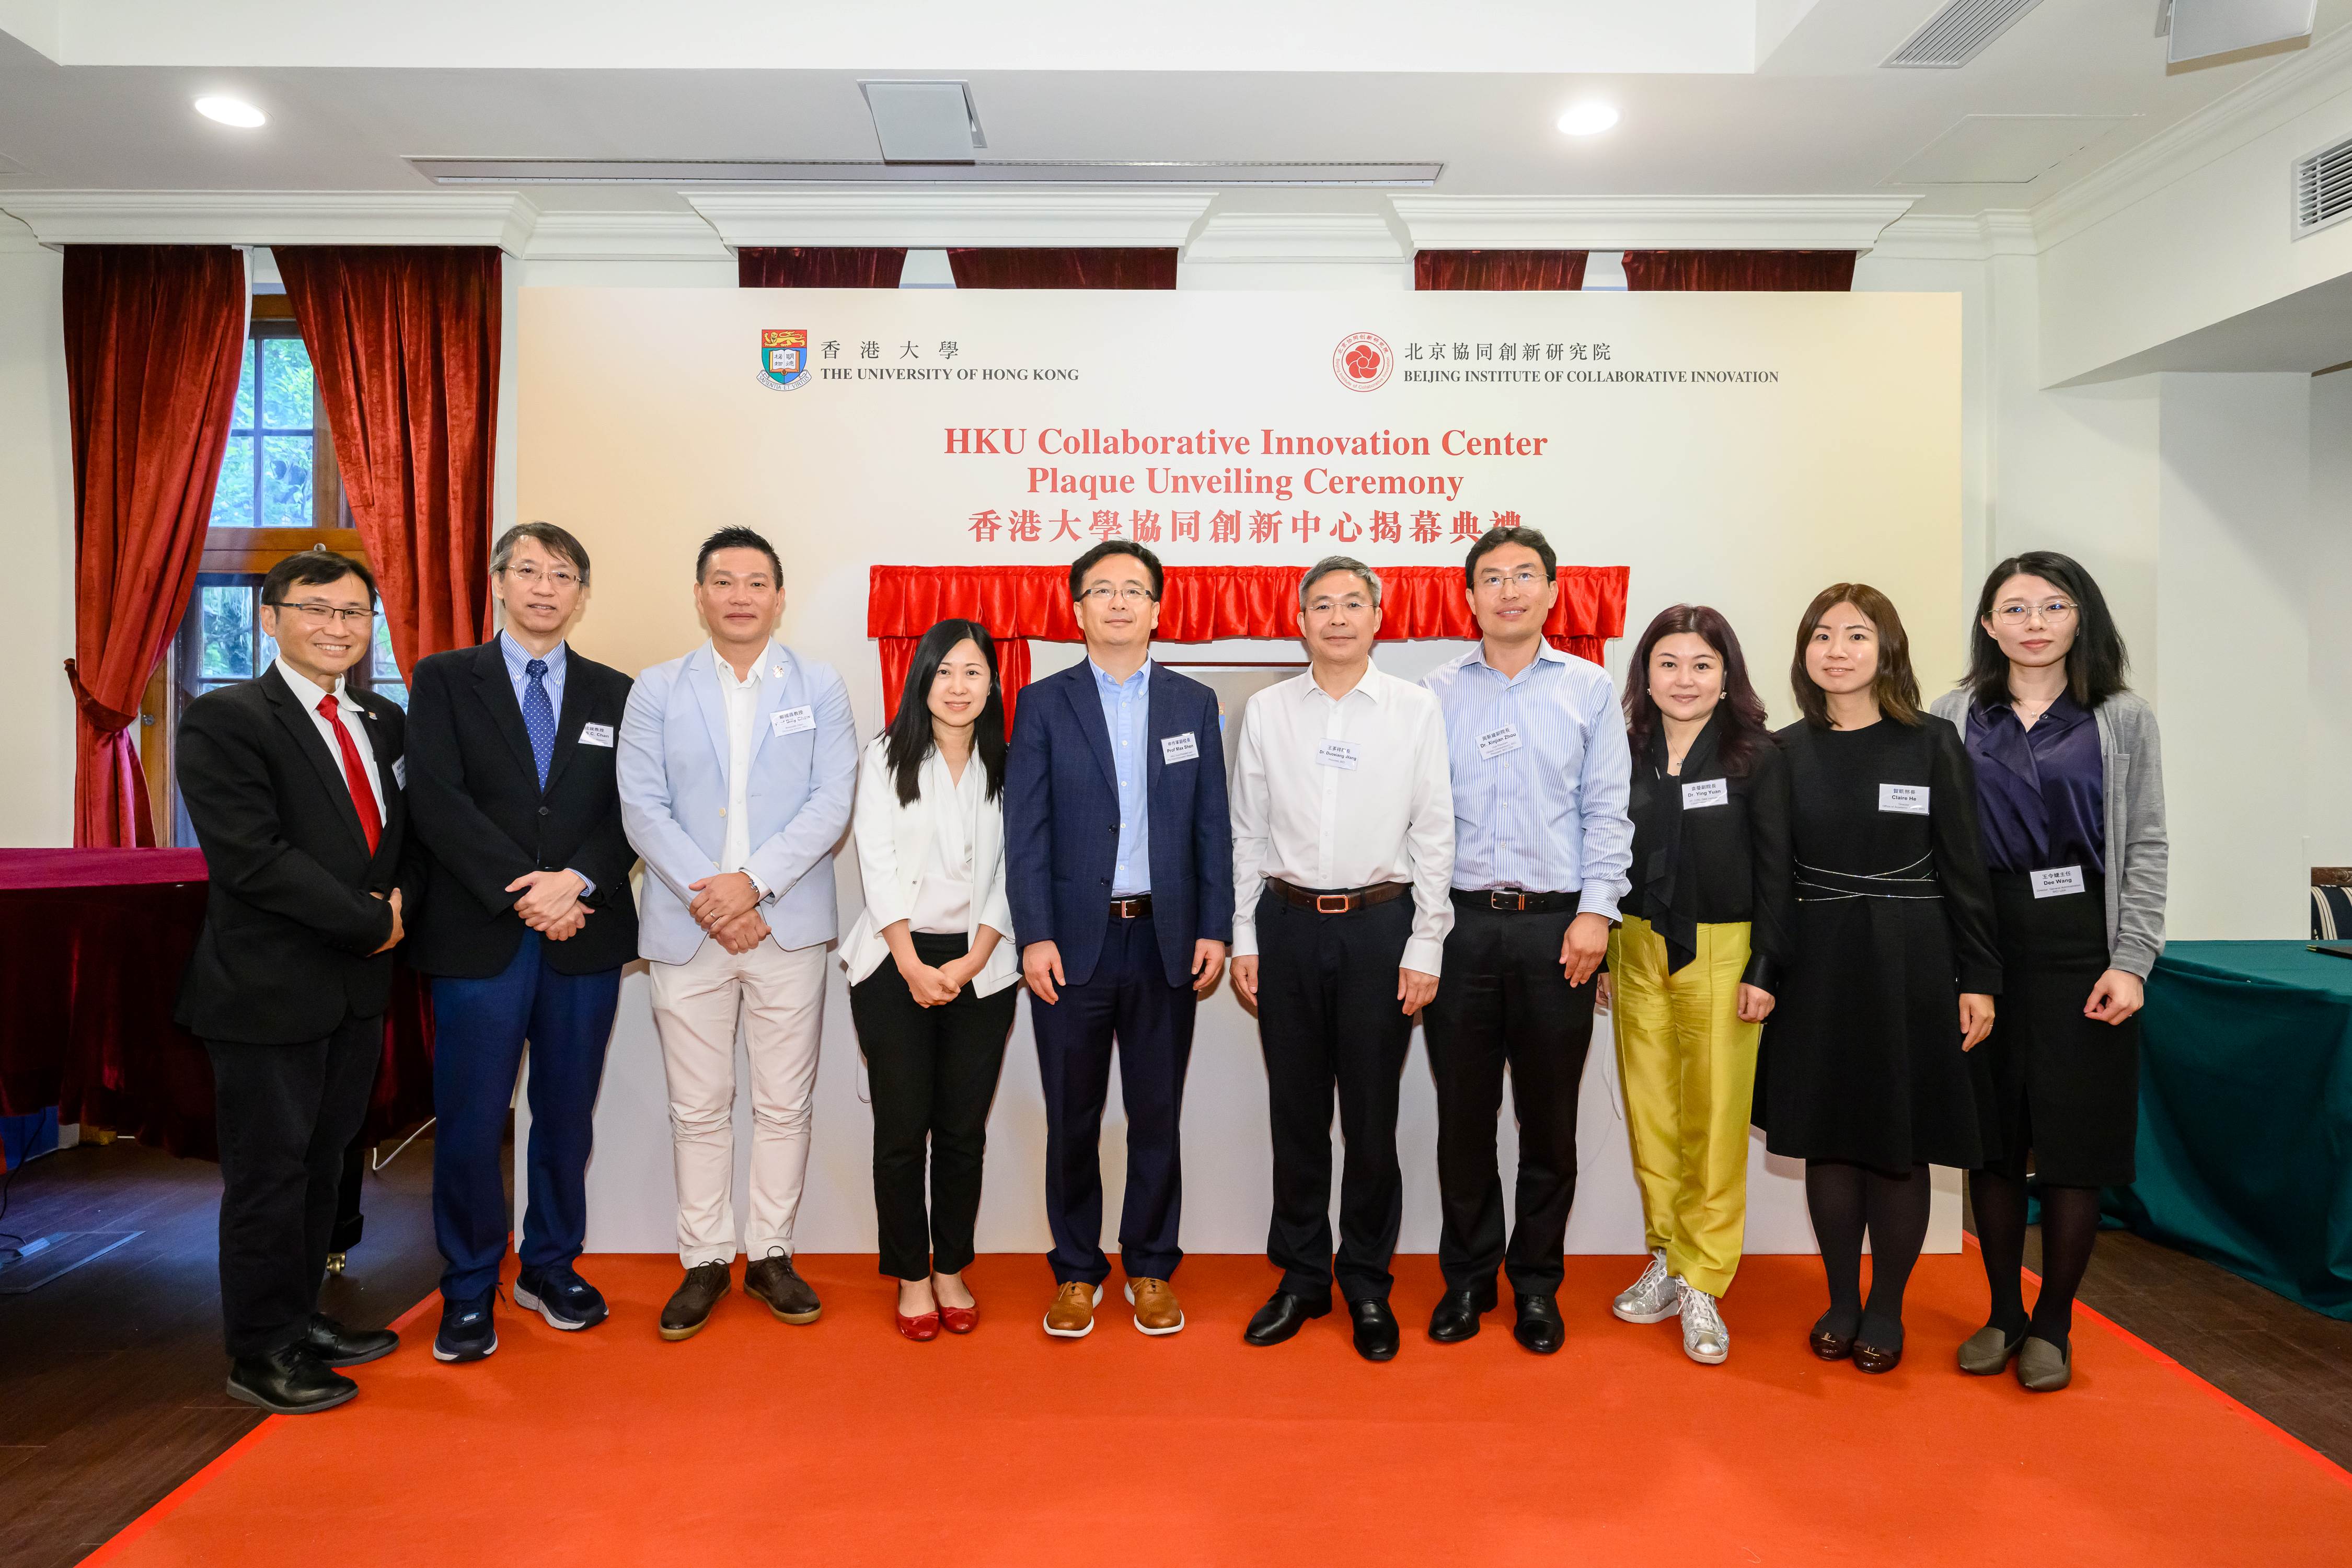 Members of the Cooperation Committee of the HKU Collaborative Innovation Center and guests from BICI attending the plaque unveiling ceremony at HKU.